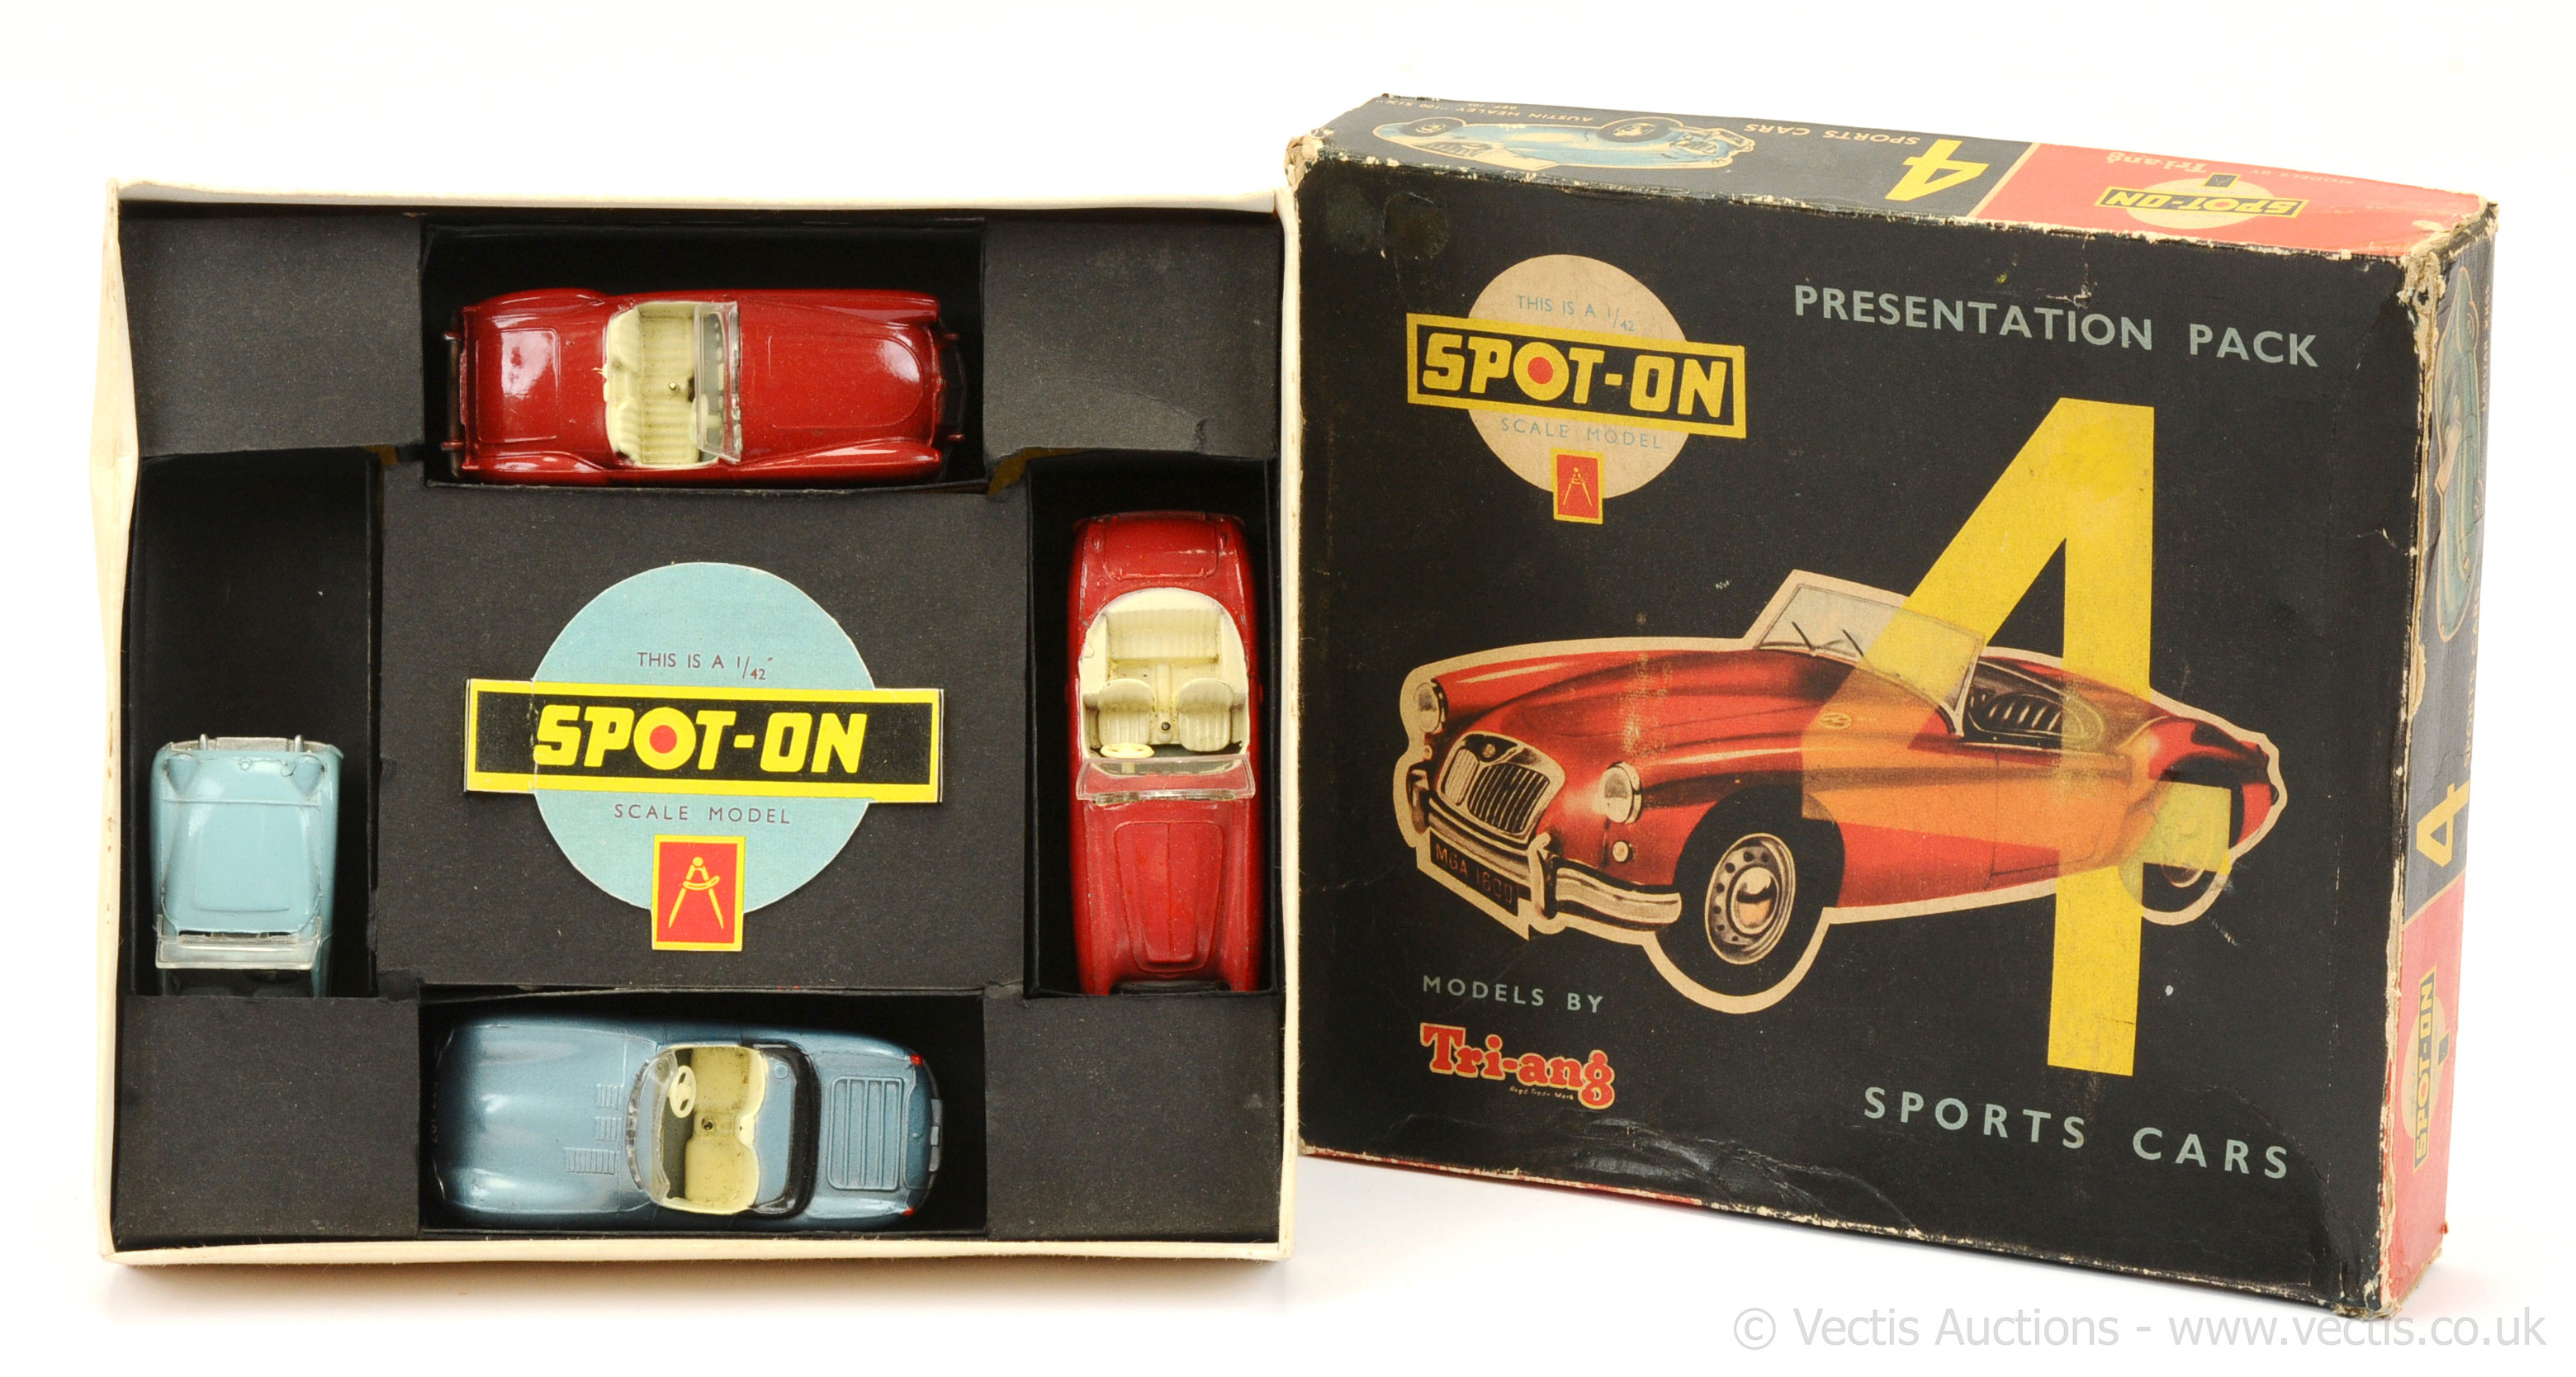 Triang Spot-On Presentation Pack "Sports Cars"